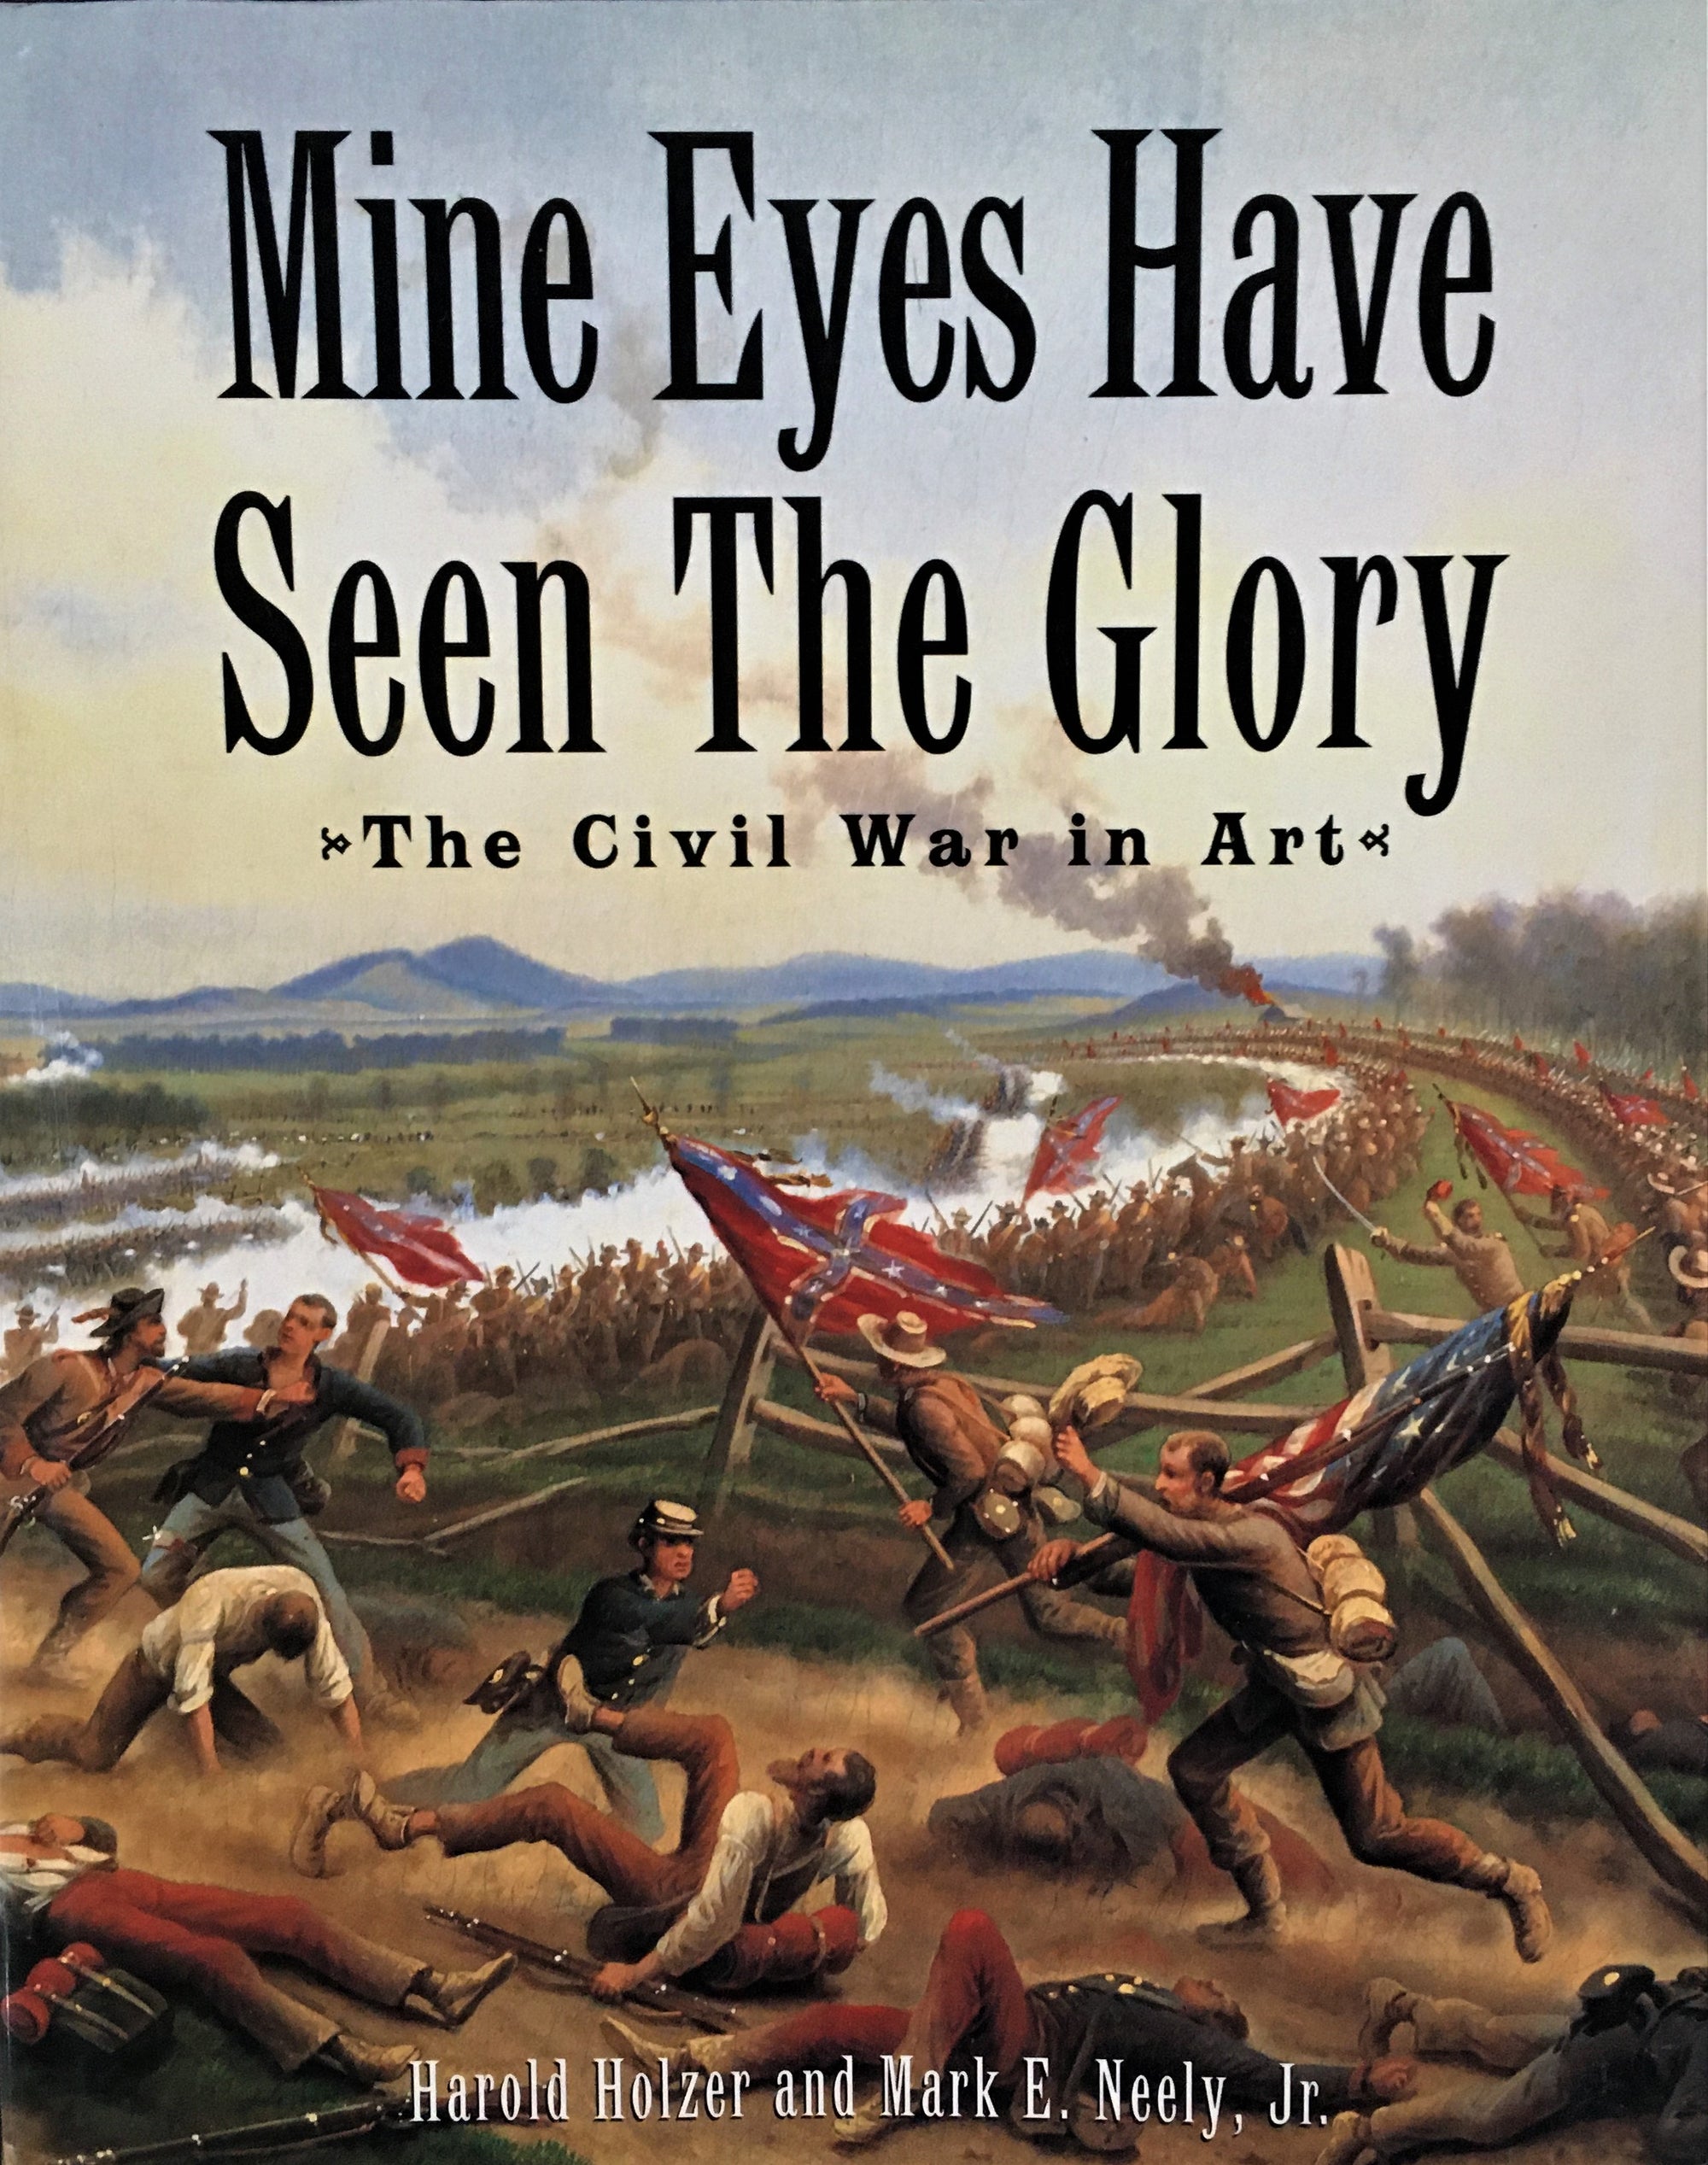 Mine Eyes Have Seen The Glory: The Civil War in Art by Harold Holzer & Mark E. Neely, Jr.